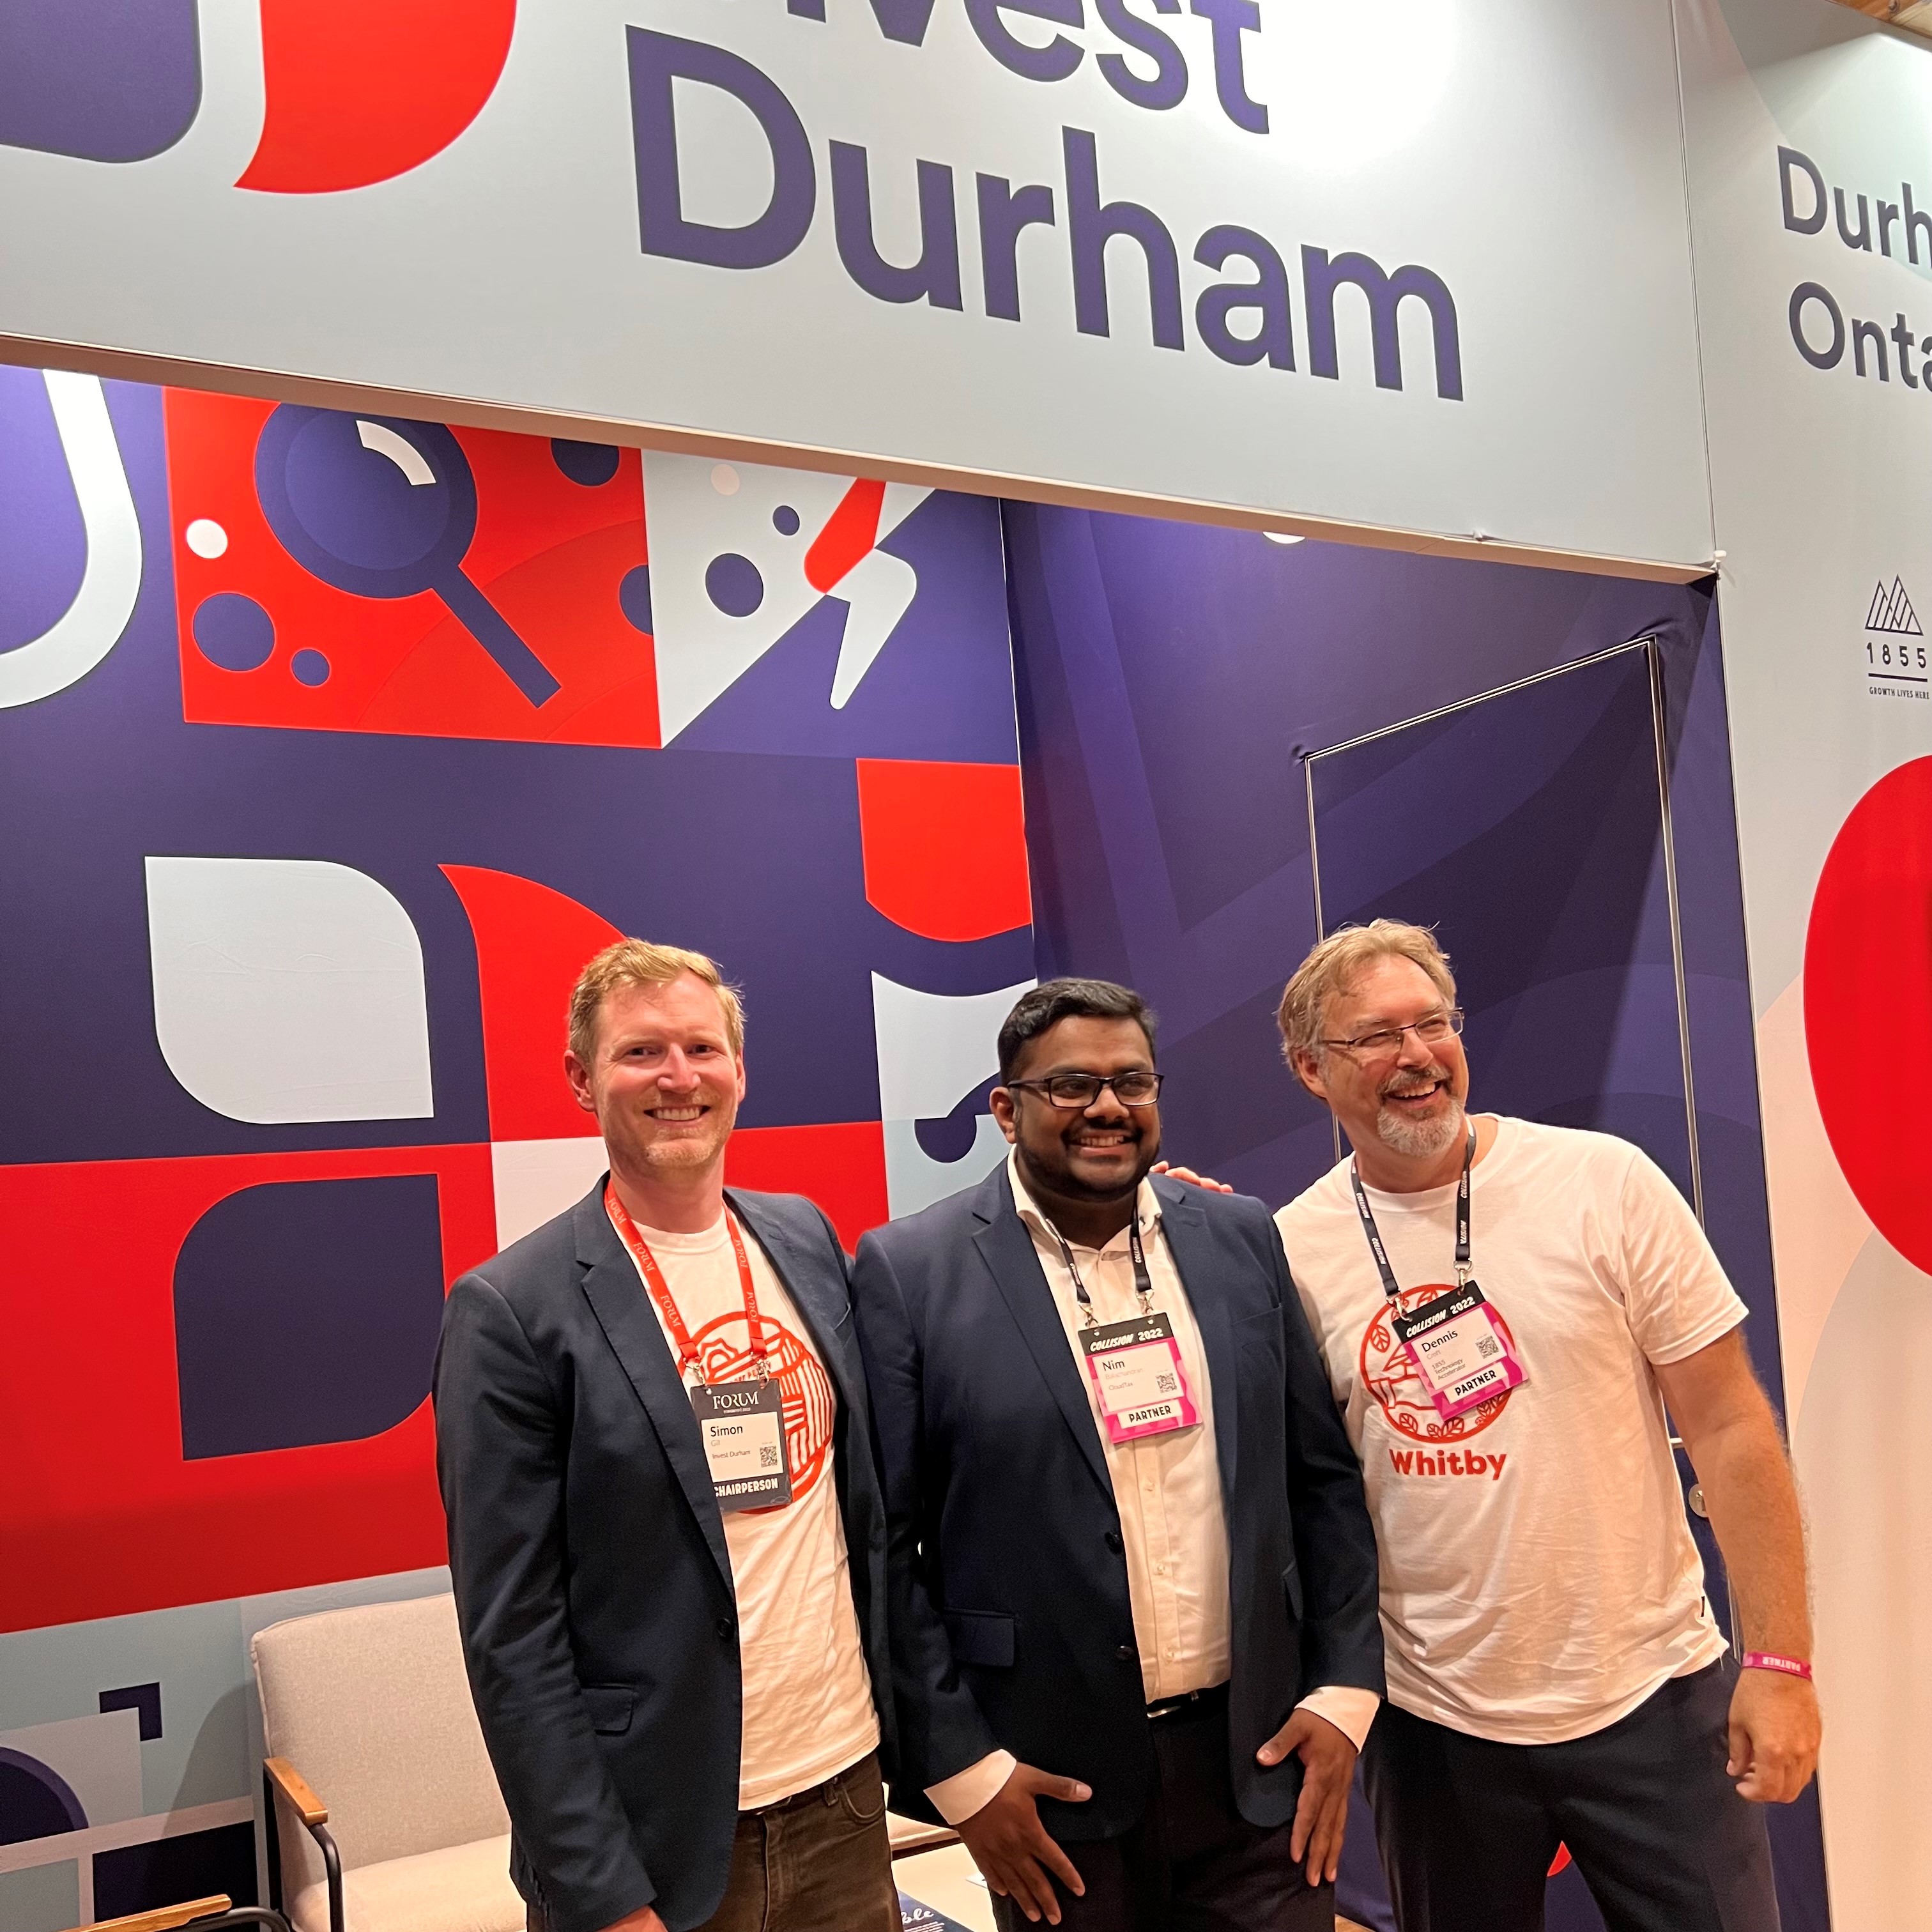 Team shot of CloudTax with Invest Durham and 1855 at Collision Conference.